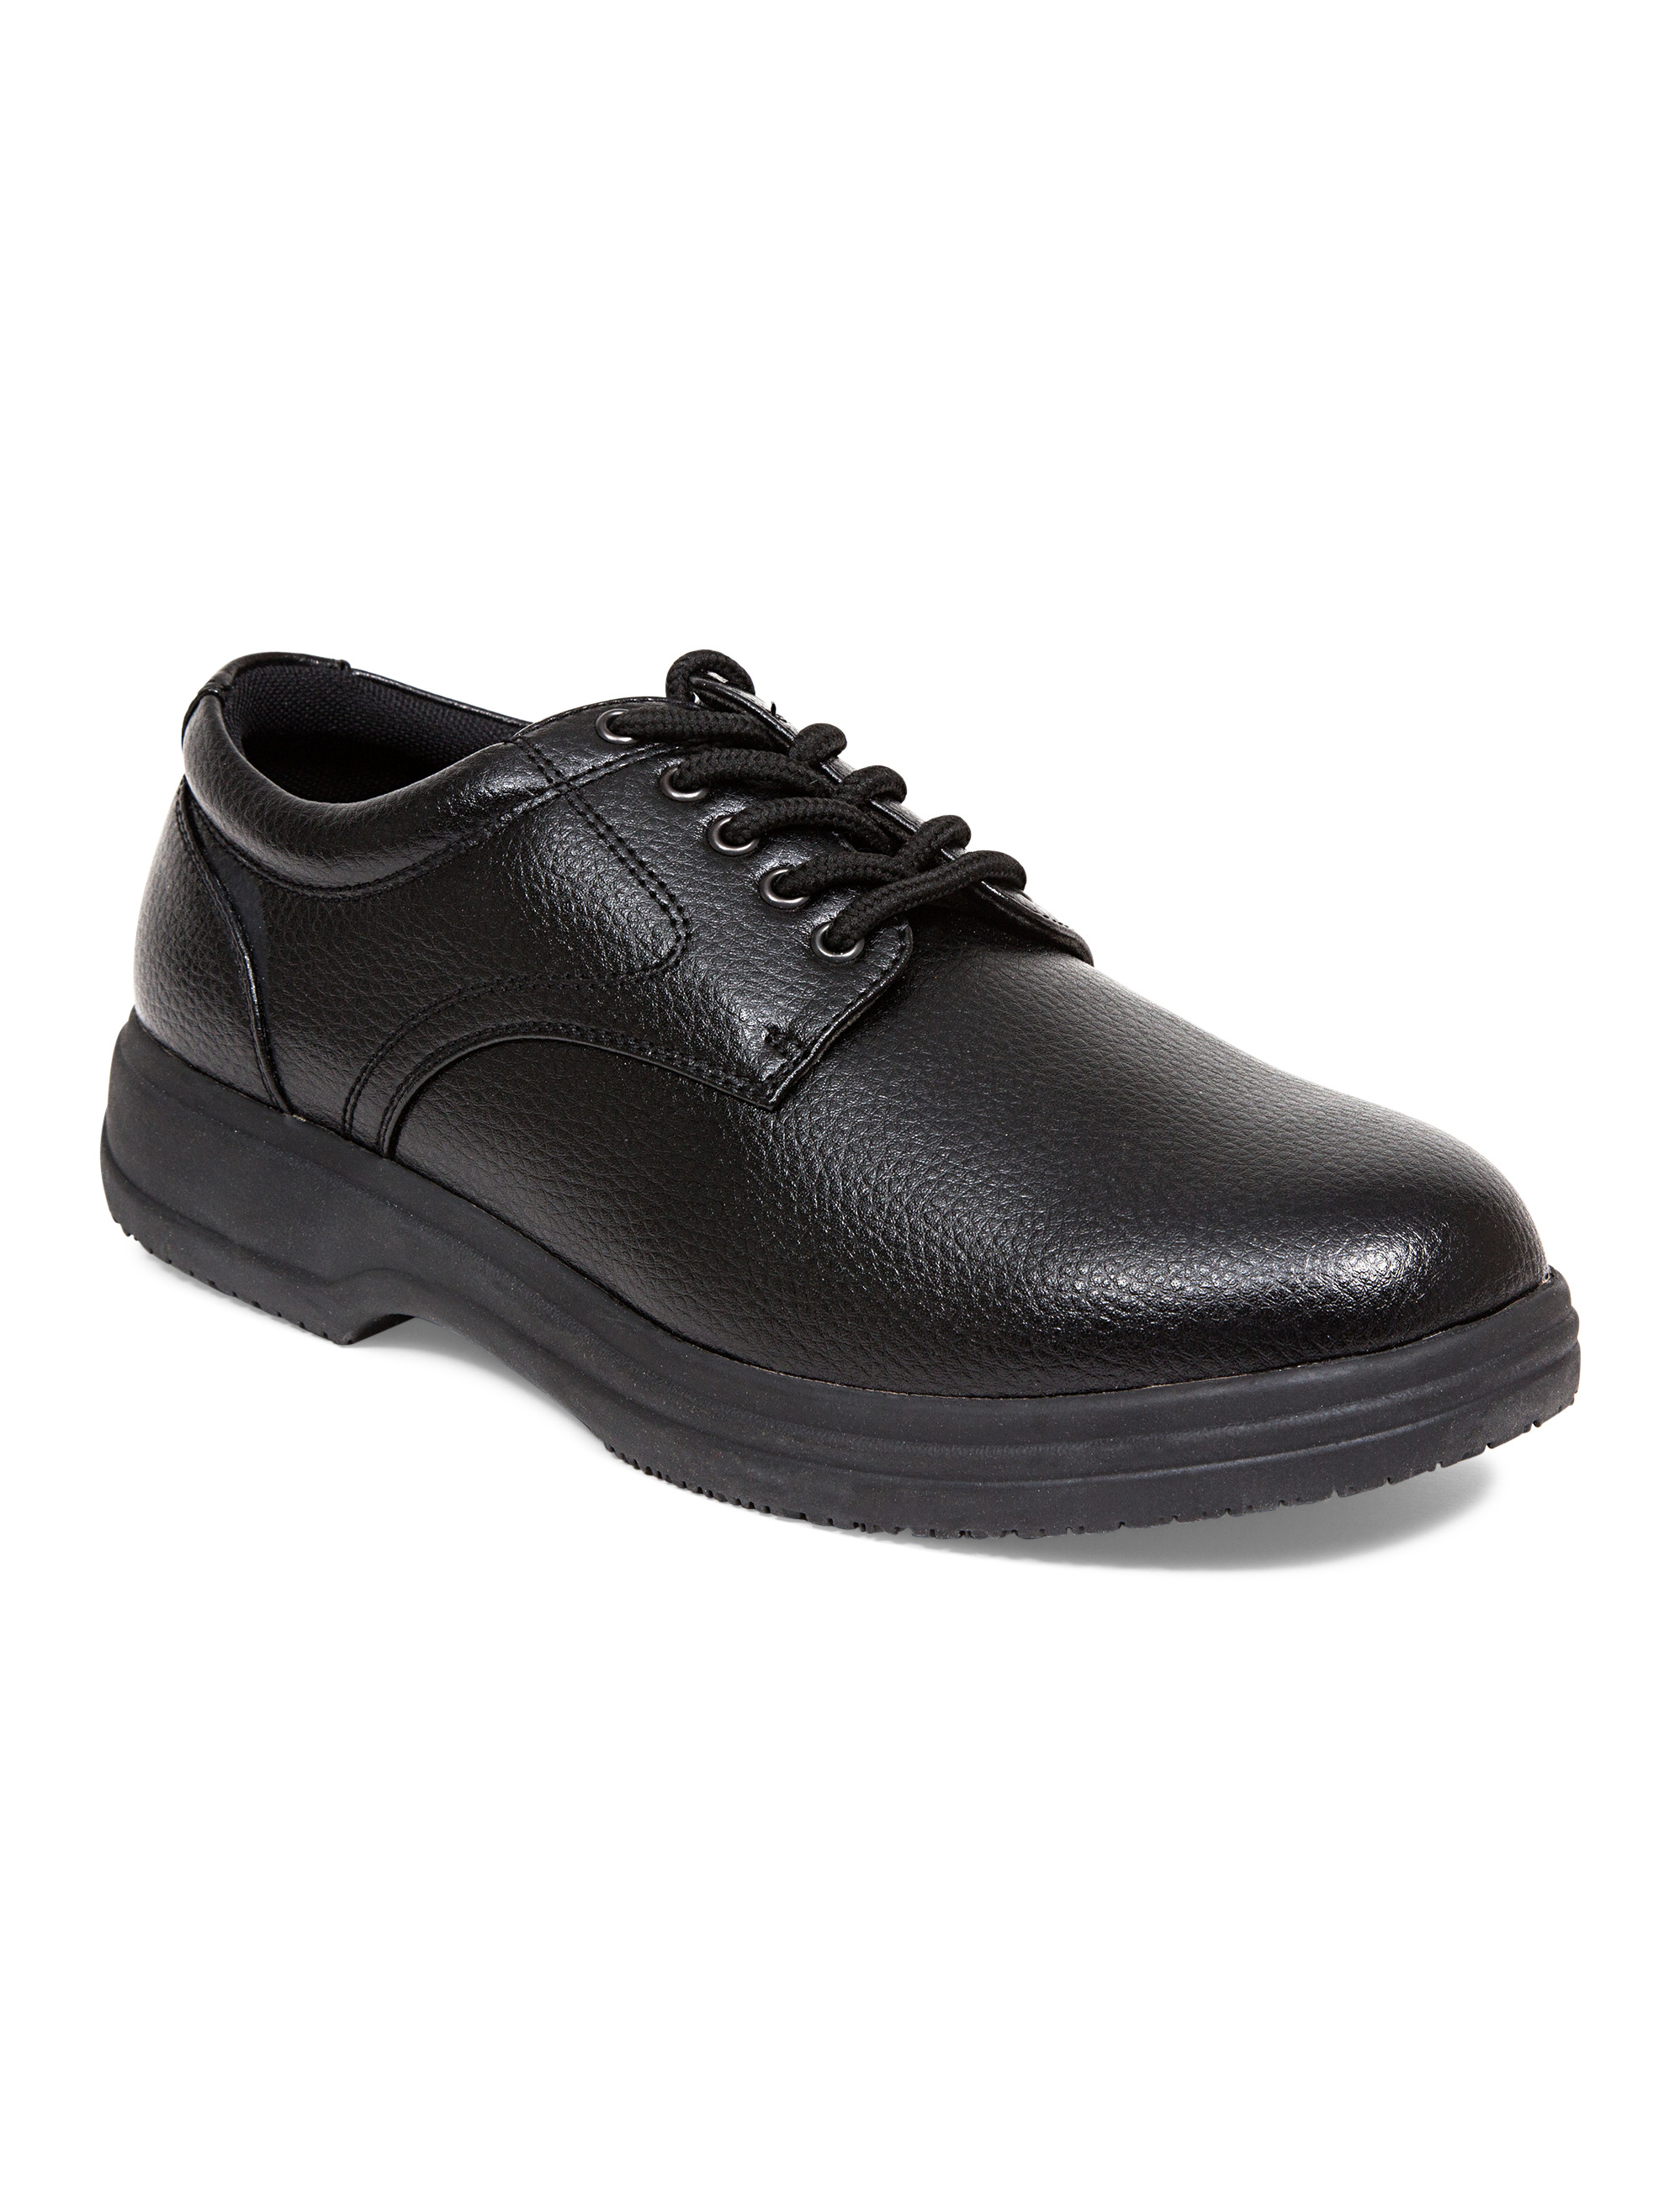 Deer Stags Service Comfort Oxford Shoes